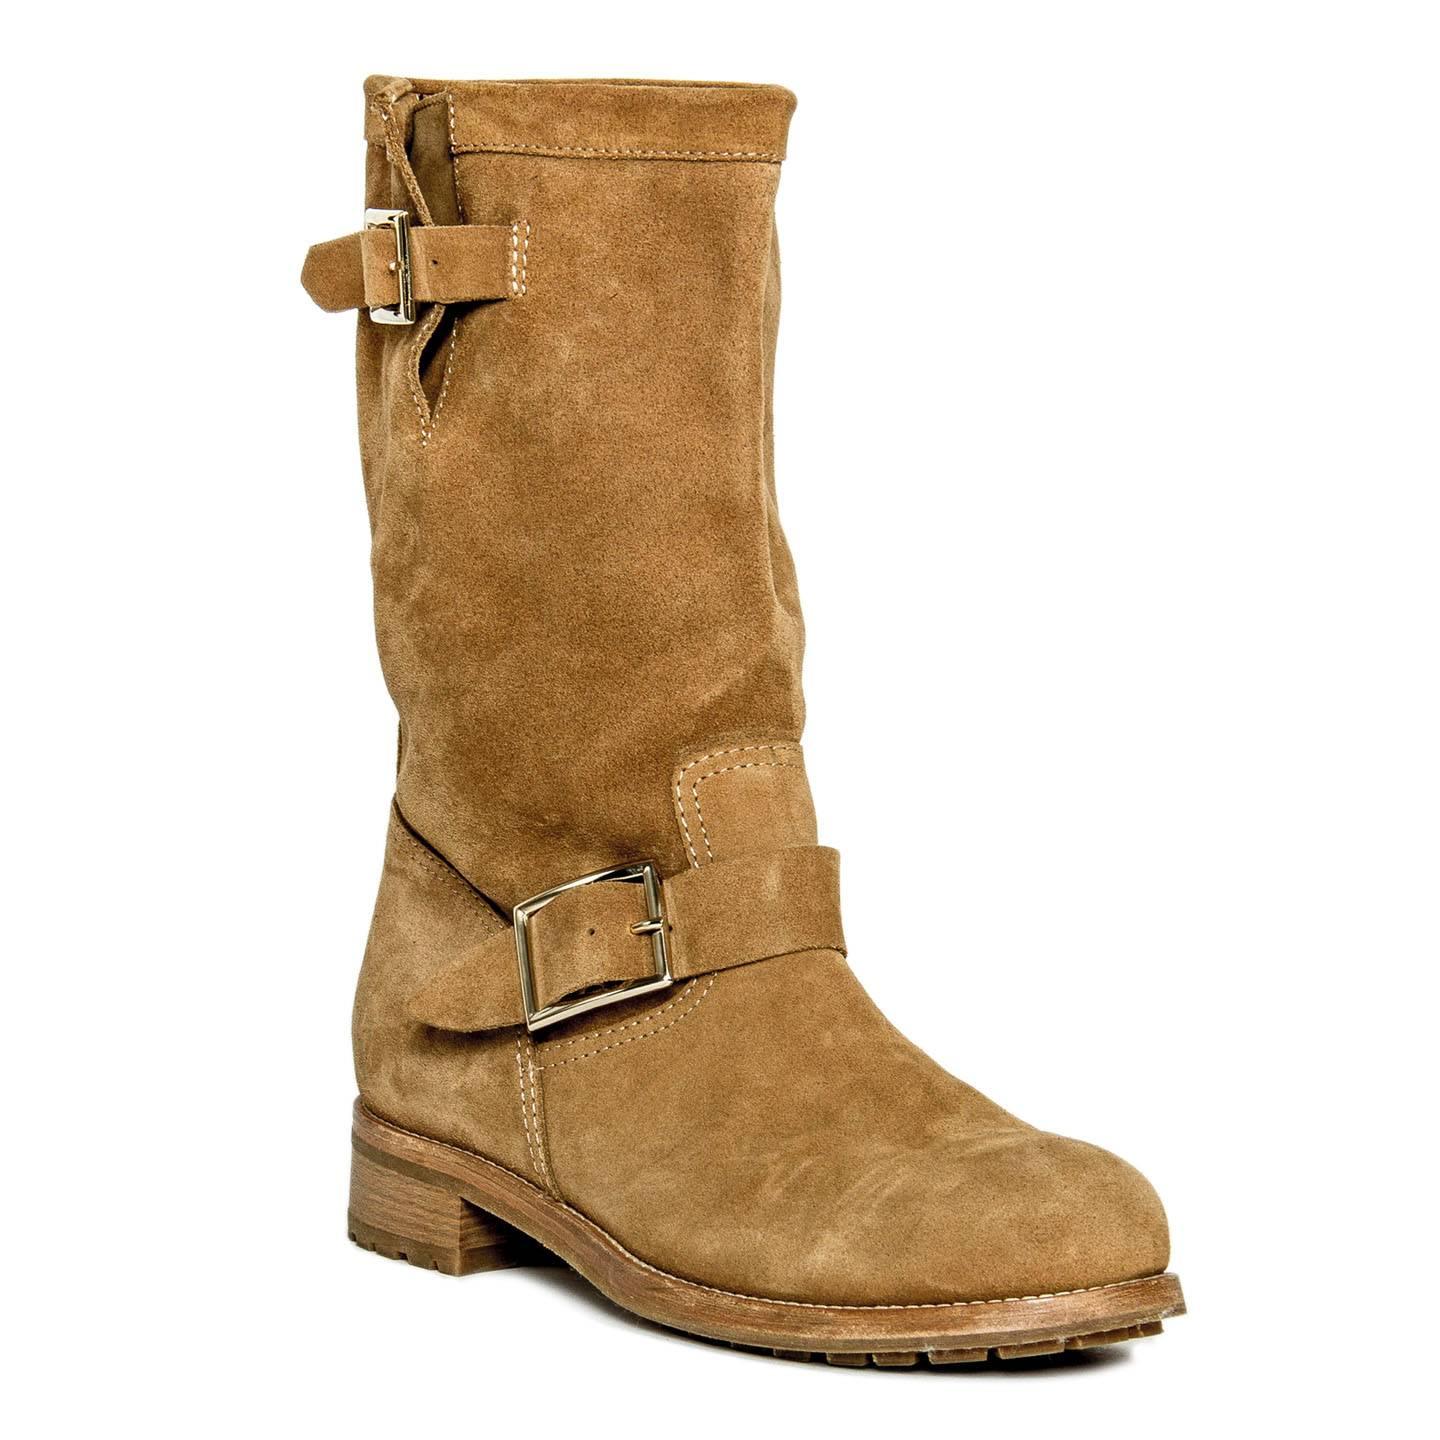 Whiskey brown suede pull on yard calf boots with front band fastening at side ankle with a silver buckle that matches the one on top edge. The whole boots are enriched by stitching details, a silver plaque stamped with the designer name embellishes